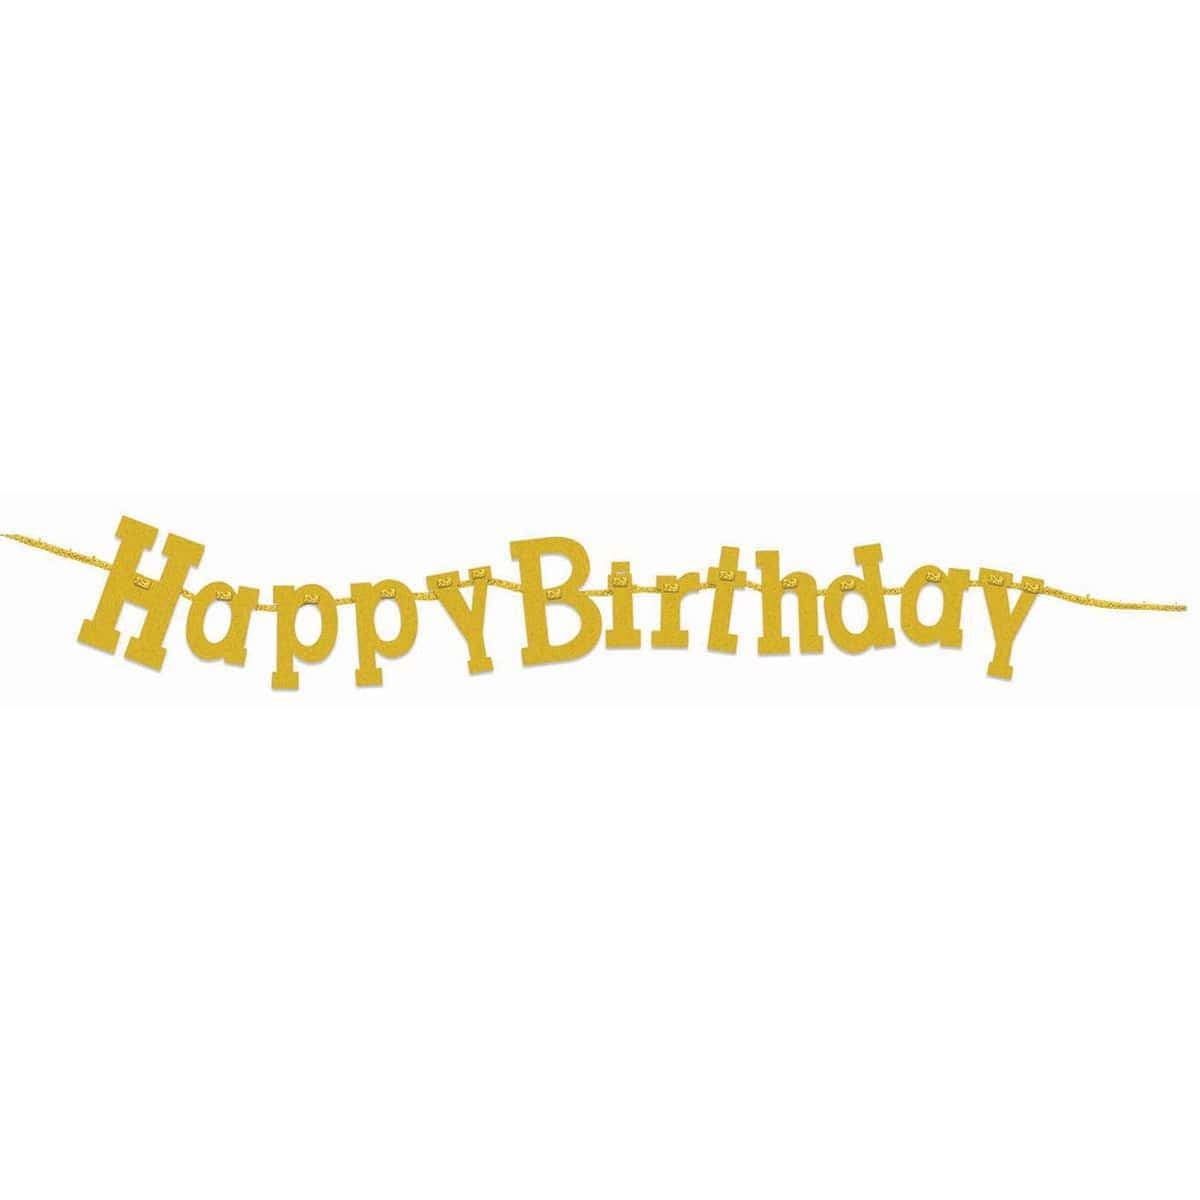 Buy General Birthday Diamond Banners 7 In. - Happy Birthday - Gold sold at Party Expert